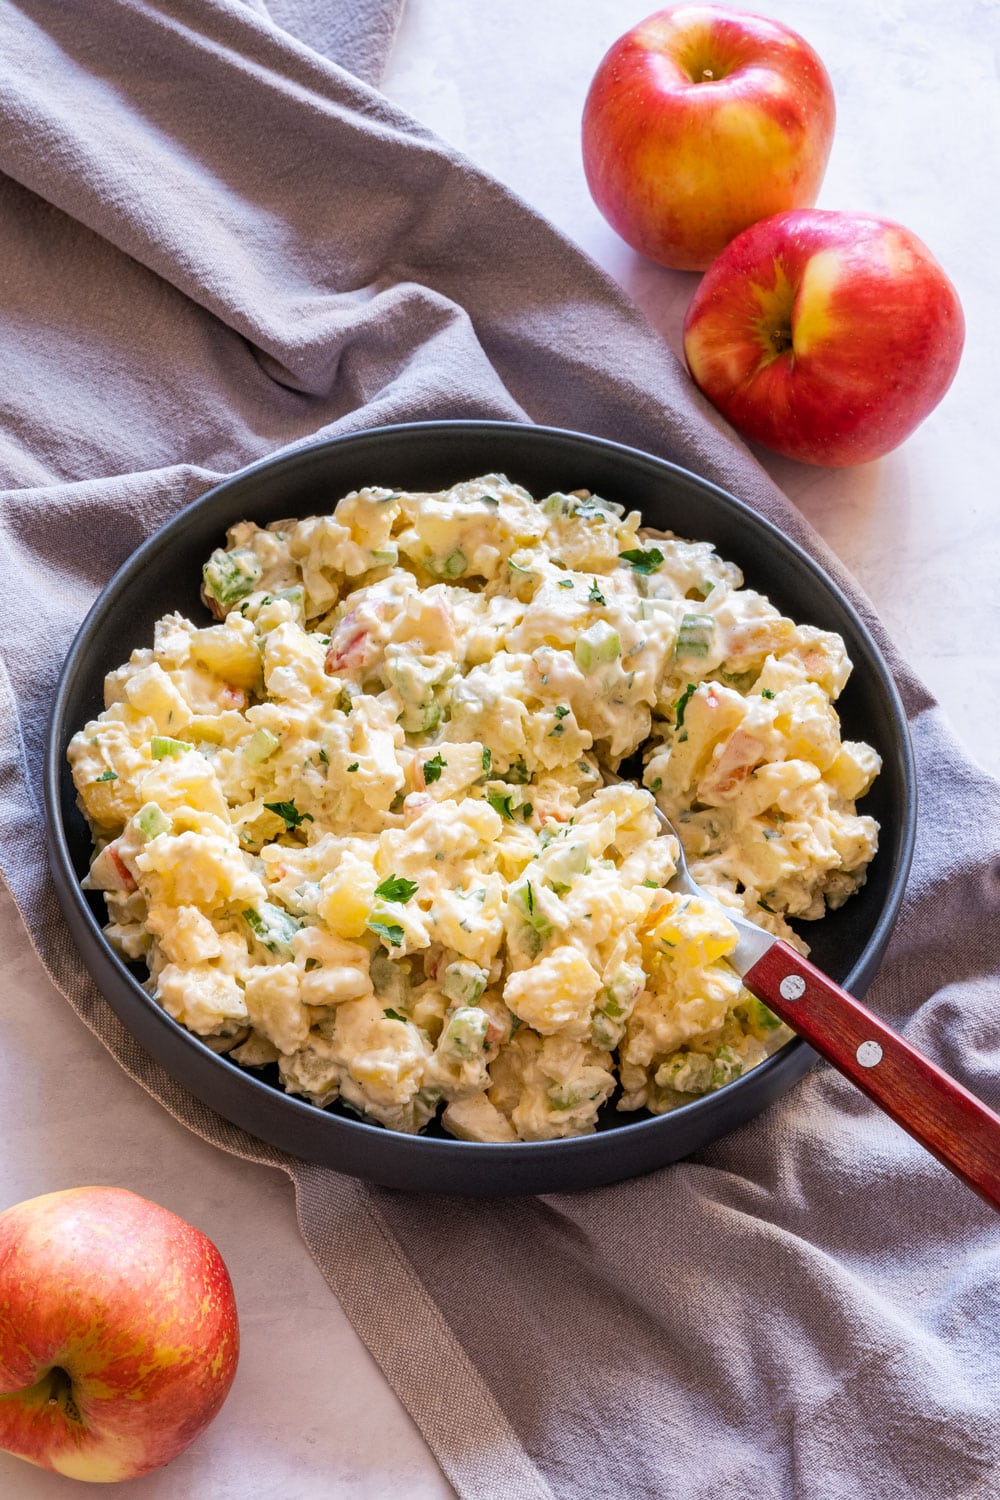 Homemade creamy potato salad with apples on the plate with fork.